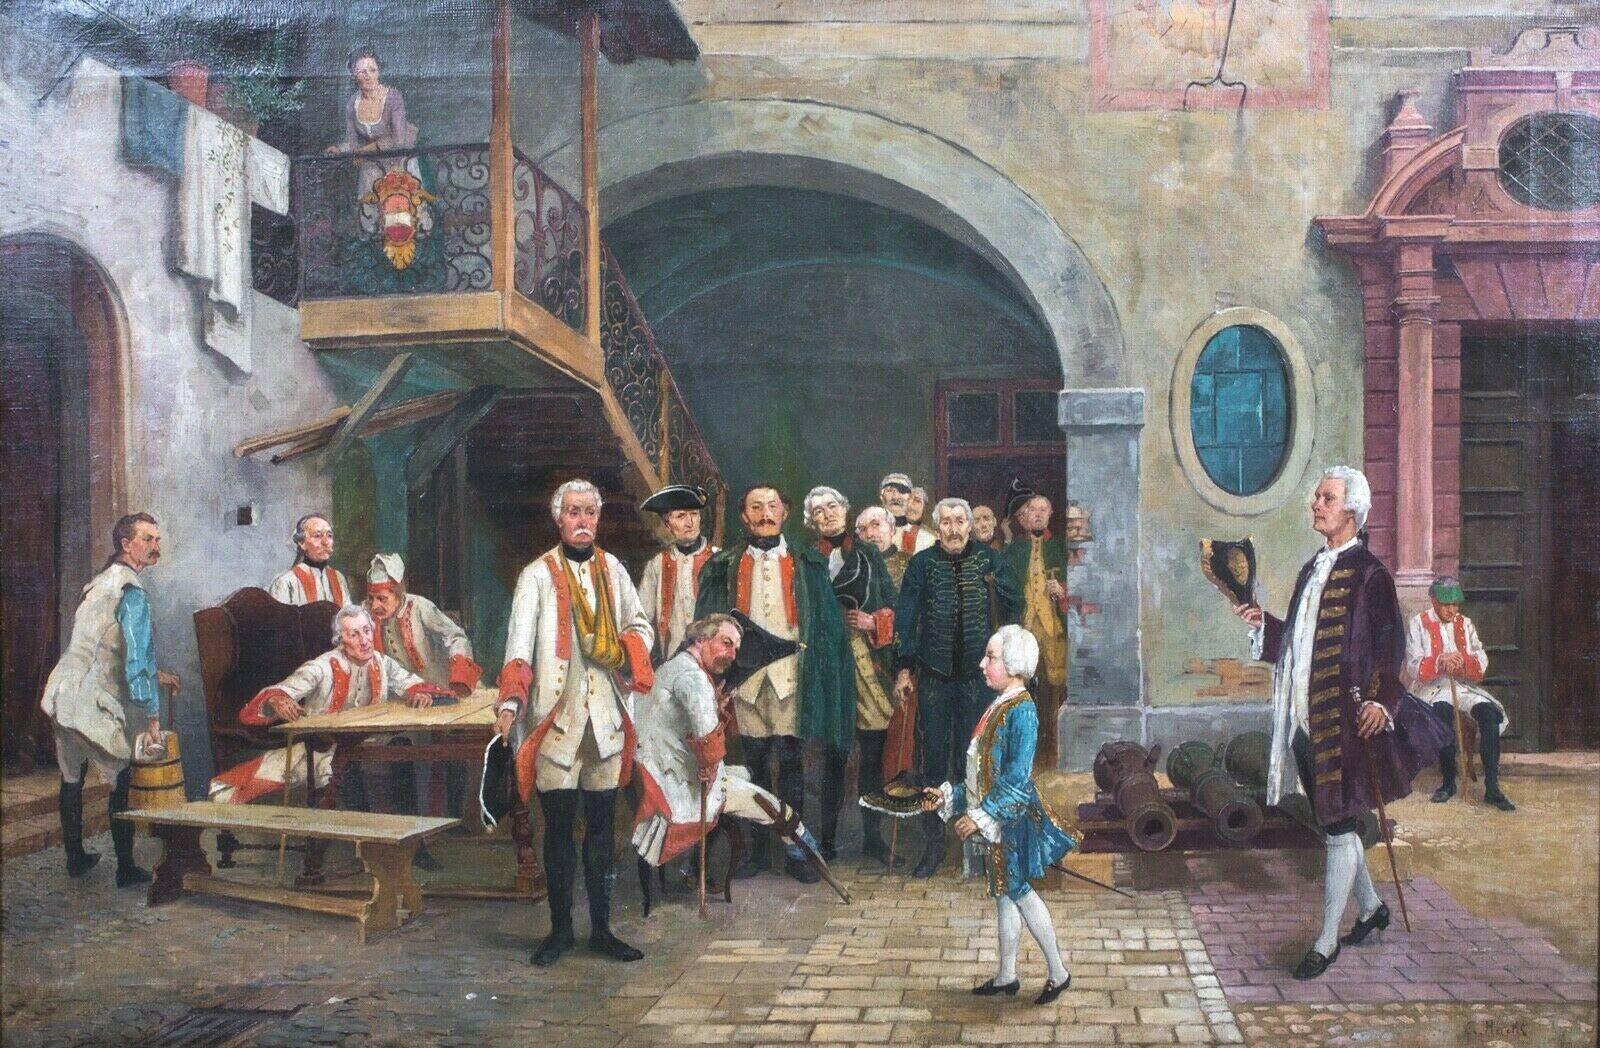 Joseph II, Holy Roman Emperor visiting wounded soldiers, 19th century - Painting by Unknown